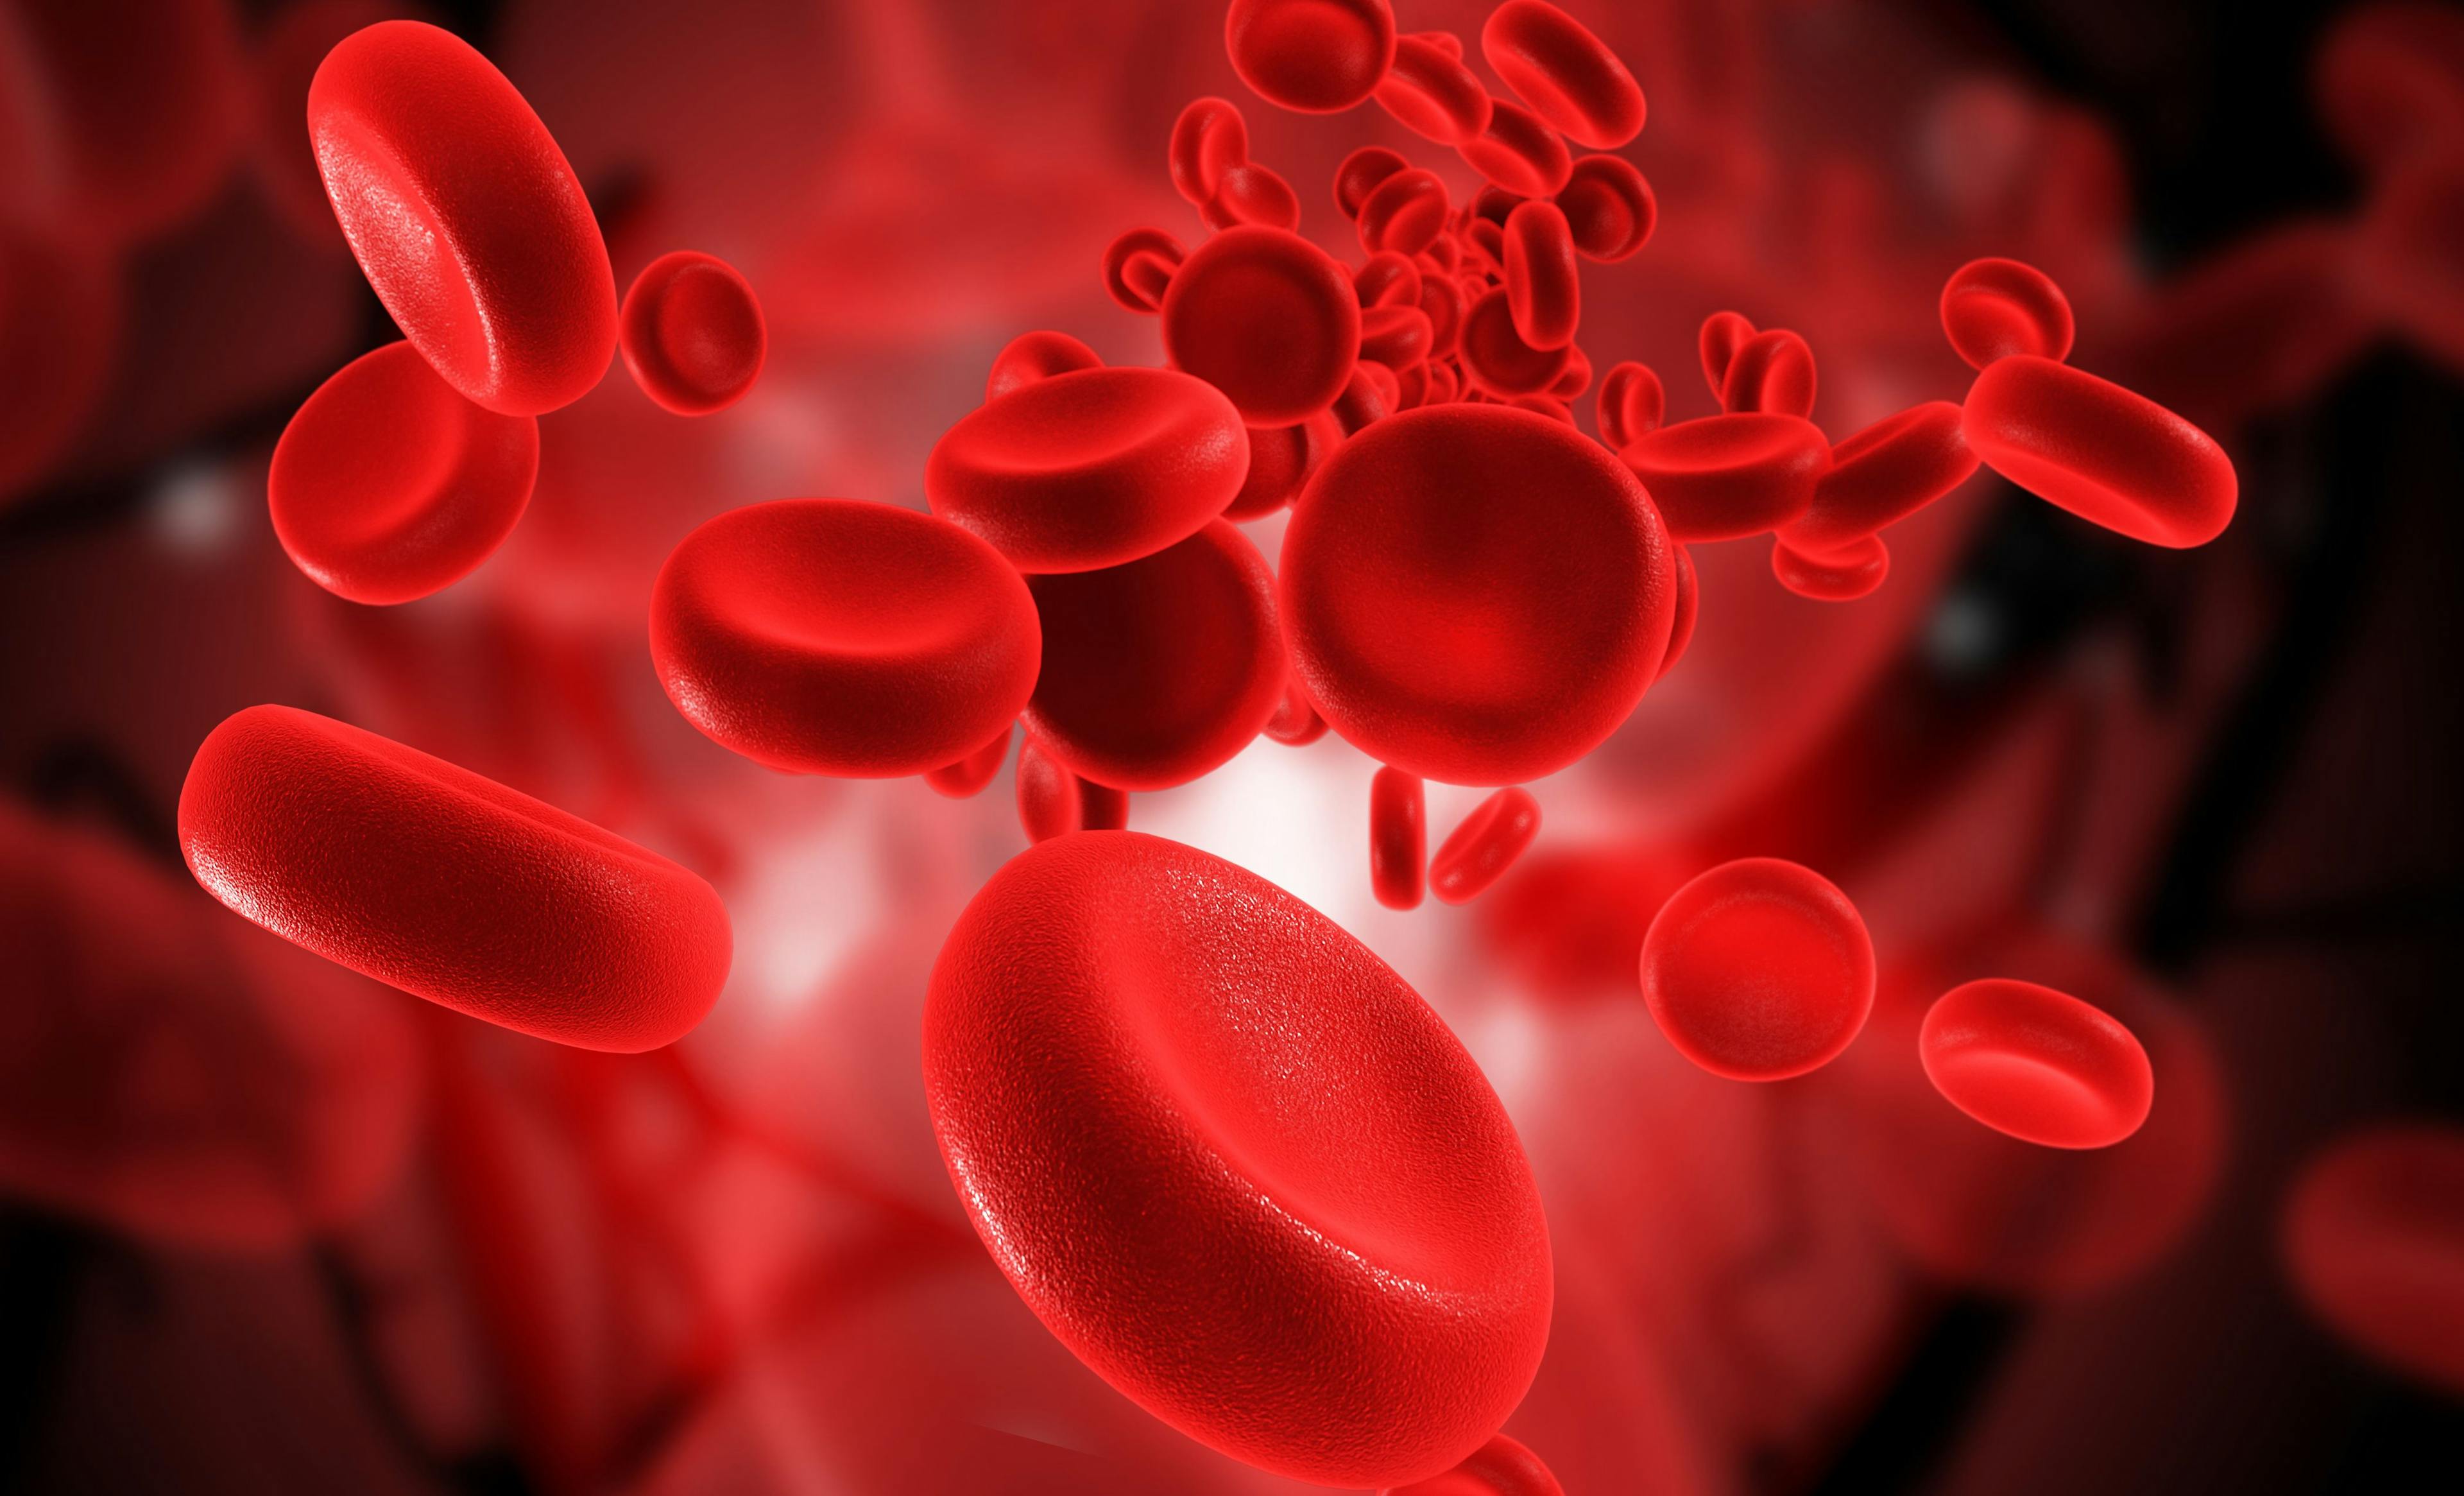 Platelet Count Acted as Predictor of Relapse in TTP